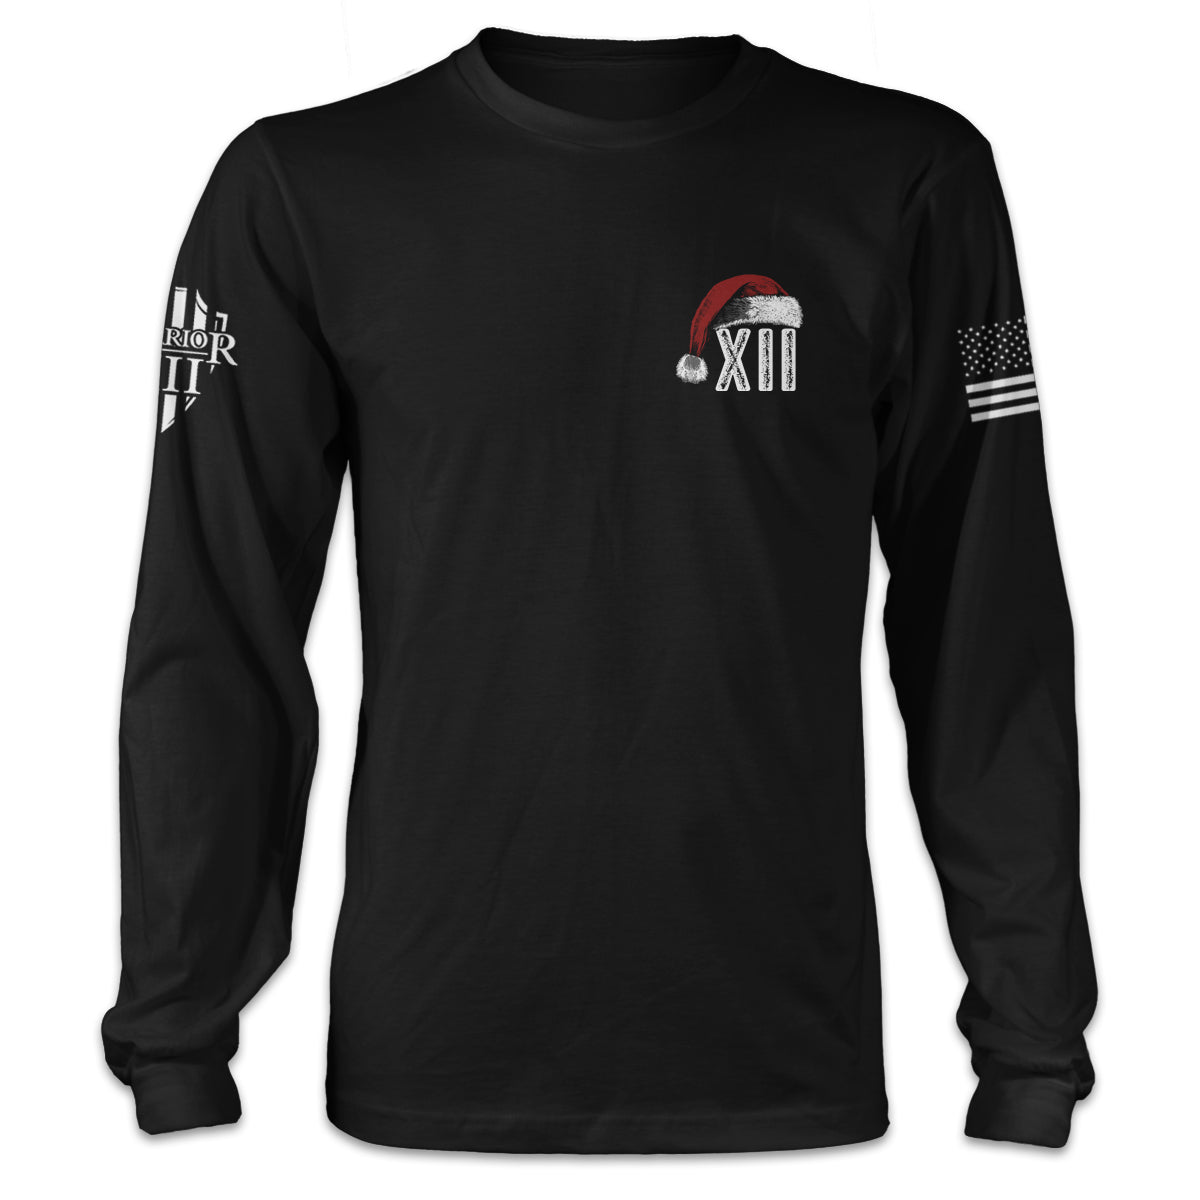 A black long sleeve shirt with roman numerals XII with a Santa's hat printed on the front of the shirt.